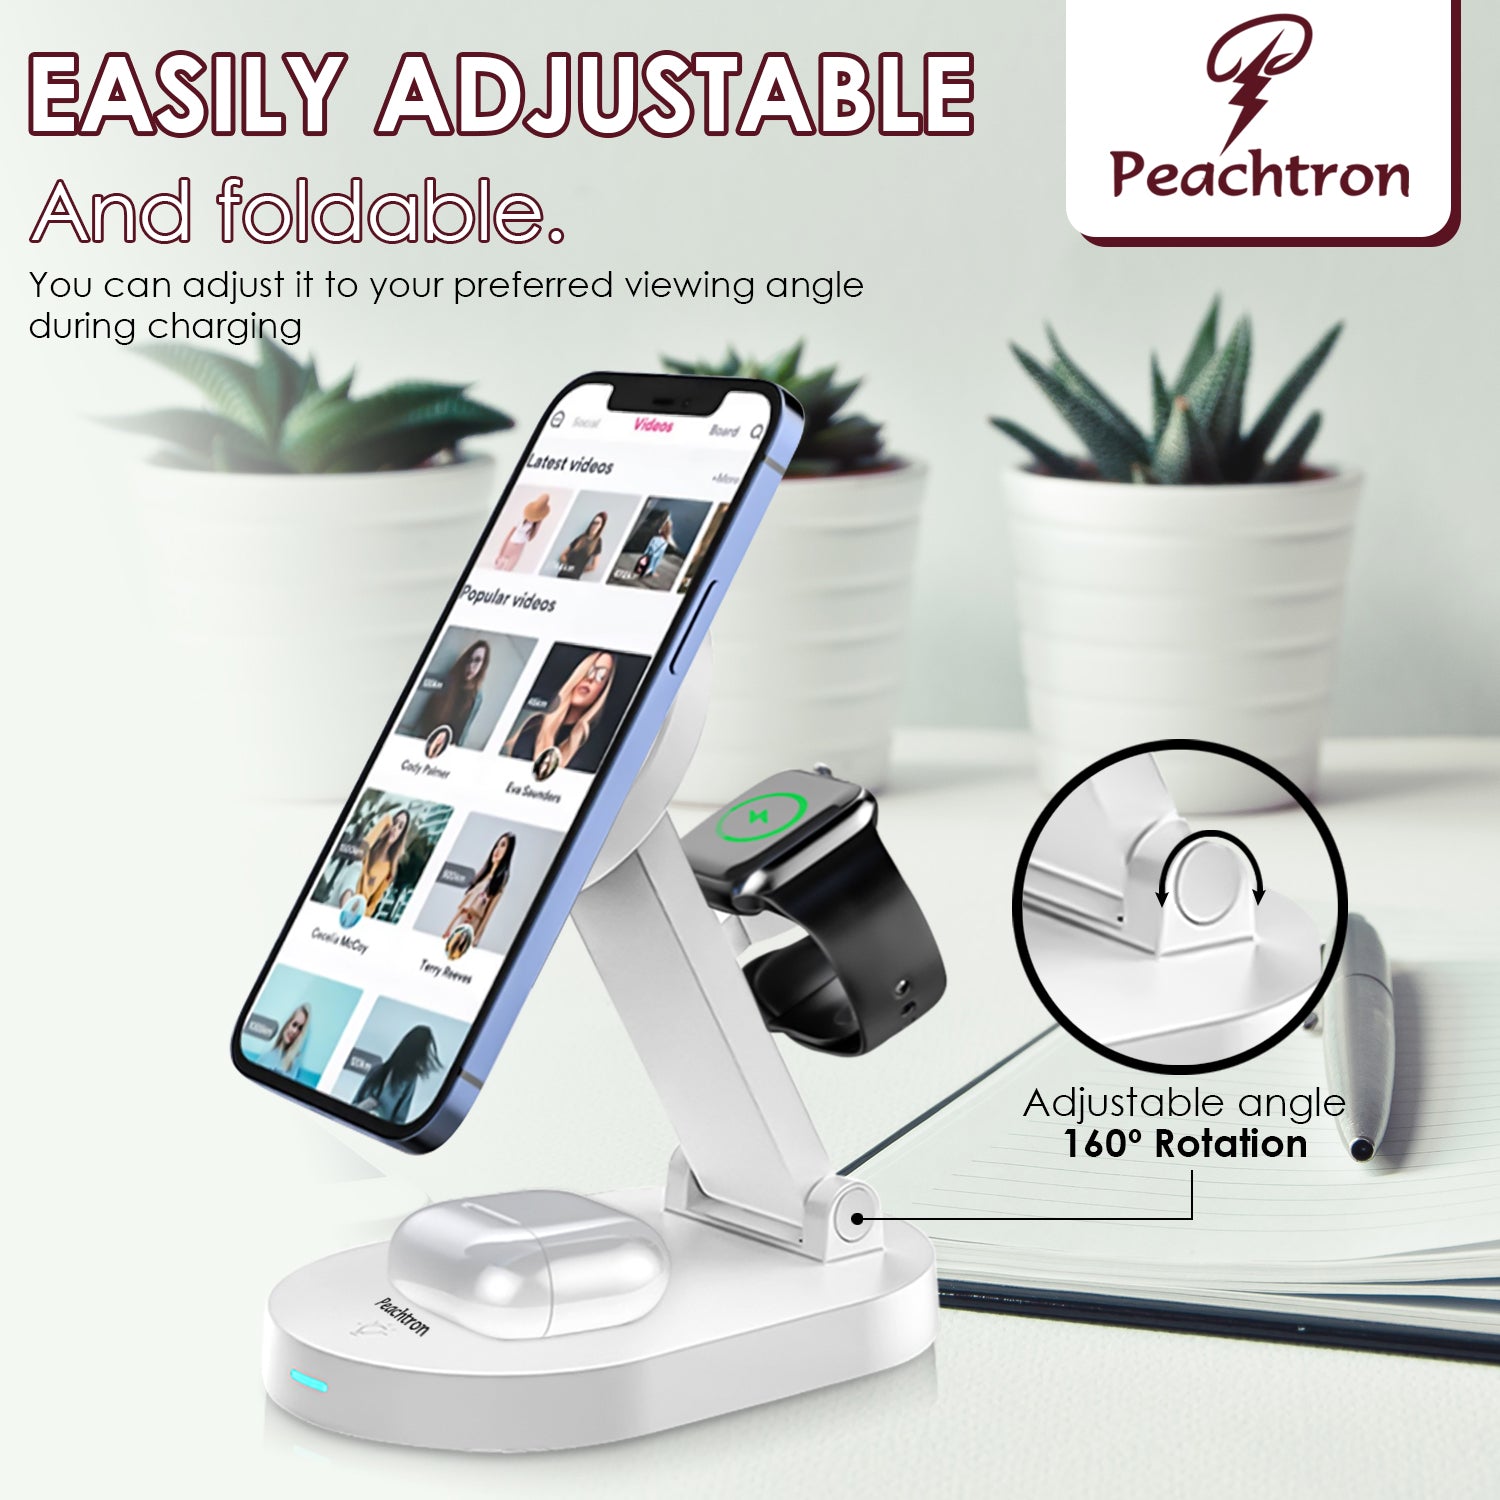 PEACHTRON Magsafe Charger, 15W Fast Wireless Charging Station, 3-in-1